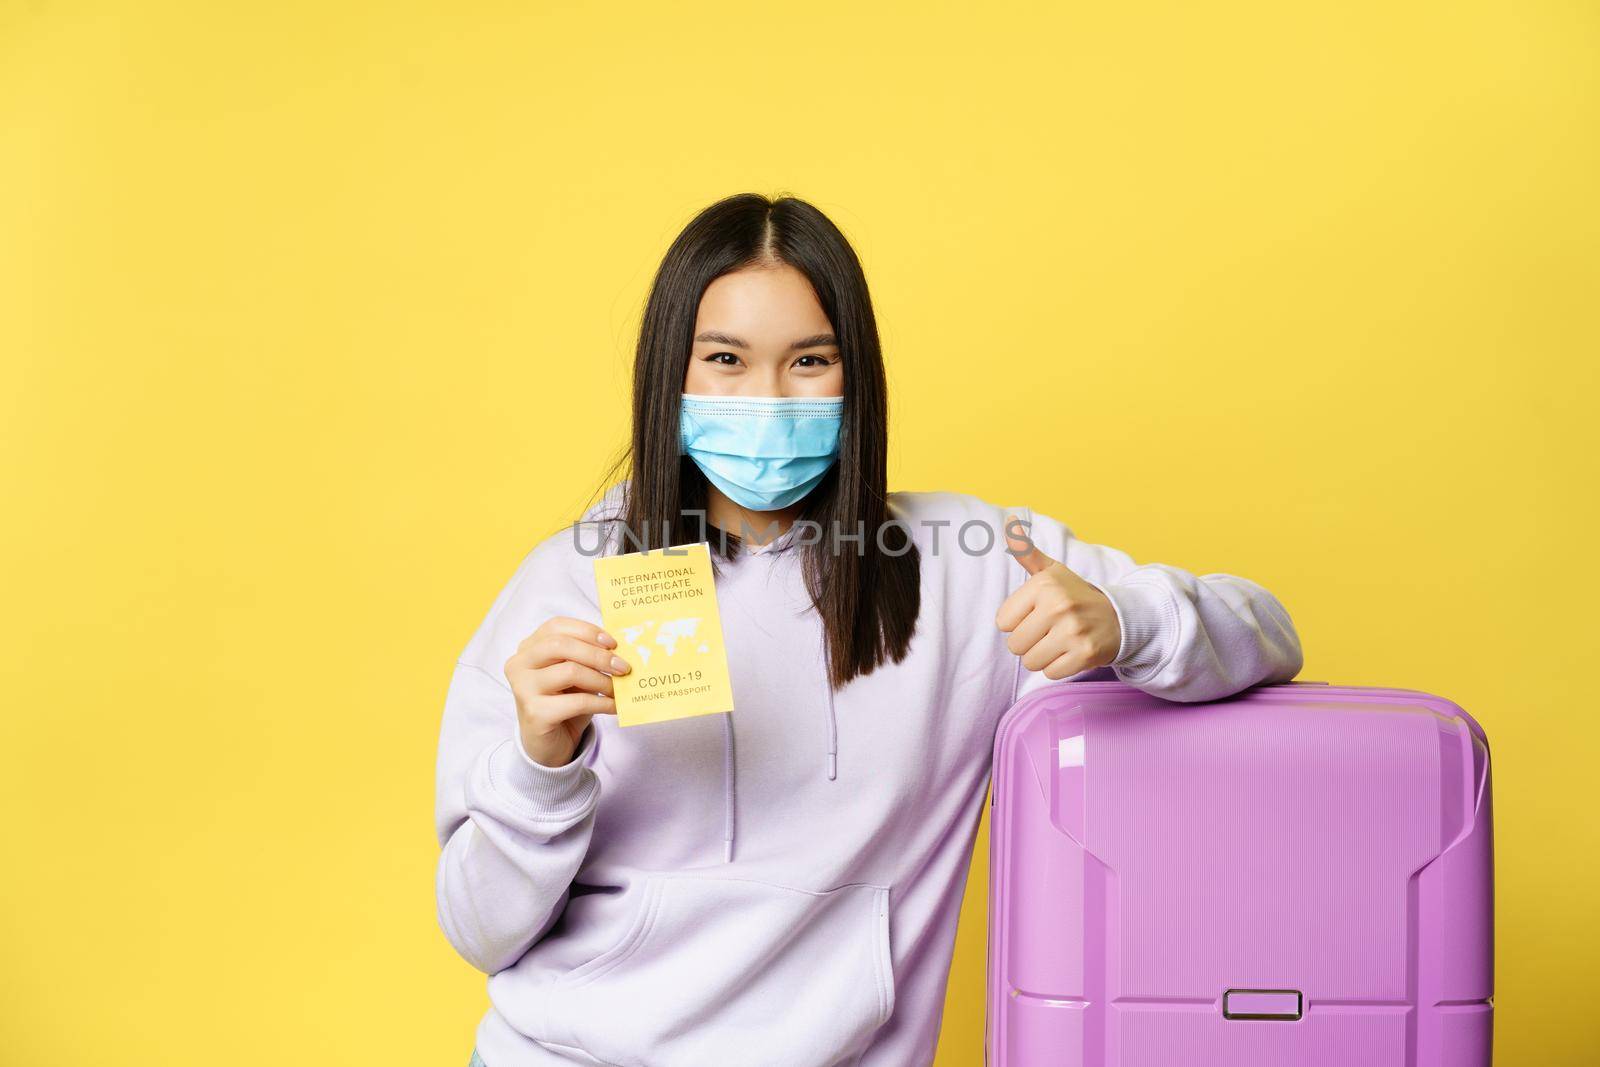 Smiling asian girl tourist in face mask, standing with suitcase, showing covid international vaccination certificate for travellers and thumbs up, yellow background.